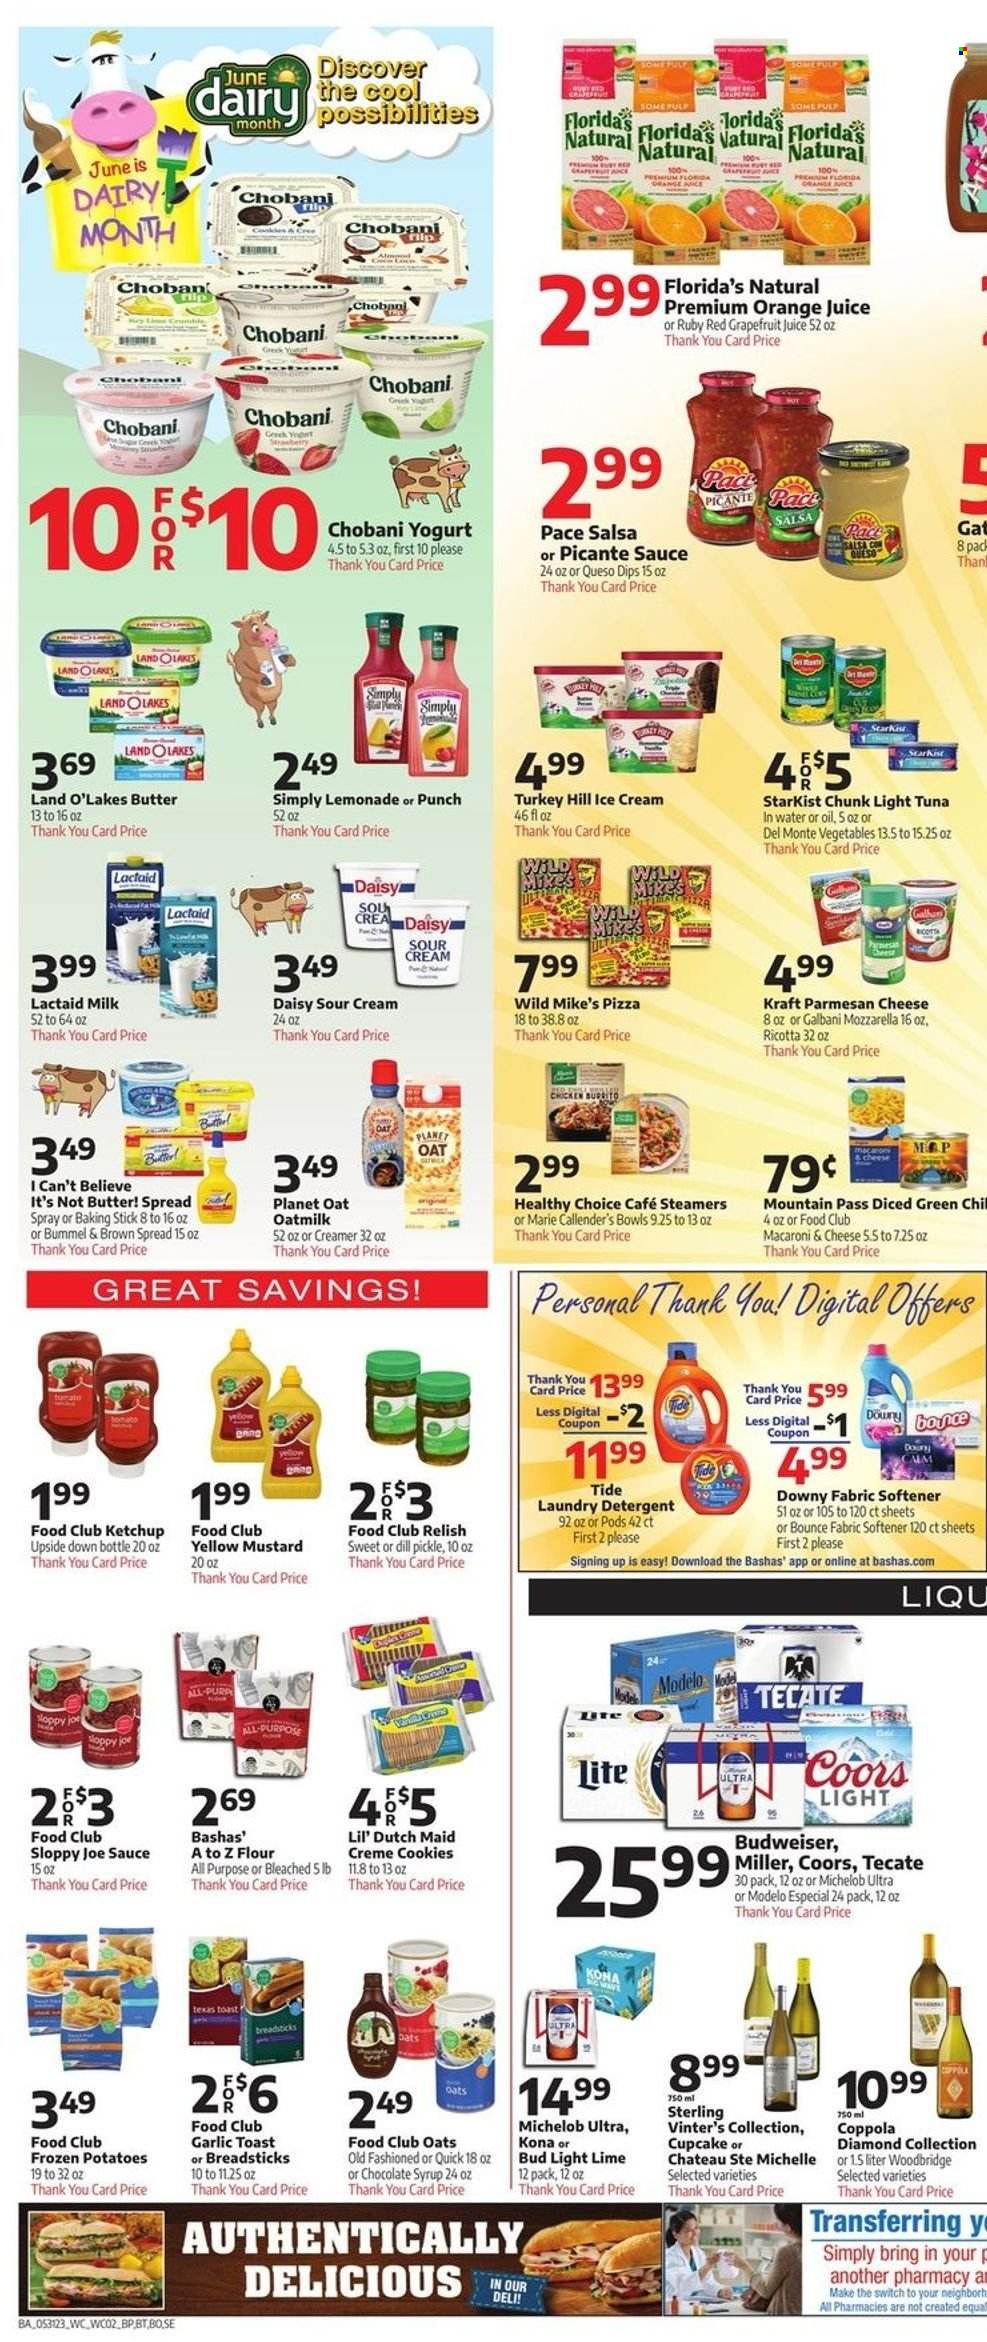 thumbnail - Bashas' Flyer - 05/31/2023 - 06/06/2023 - Sales products - cupcake, potatoes, tuna, StarKist, macaroni & cheese, pizza, sauce, Healthy Choice, Marie Callender's, Kraft®, Lactaid, ricotta, parmesan, cheese, Galbani, greek yoghurt, Chobani, milk, oat milk, I Can't Believe It's Not Butter, sour cream, creamer, ice cream, cookies, Florida's Natural, bread sticks, dill pickle, flour, canned tuna, tuna in water, light tuna, Del Monte, dill, mustard, ketchup, salsa, chocolate syrup, syrup, lemonade, switch, juice, water, Woodbridge, beer, Bud Light, Modelo, chicken, turkey, detergent, Tide, fabric softener, laundry detergent, Bounce, Downy Laundry, Budweiser, Coors, Michelob. Page 2.